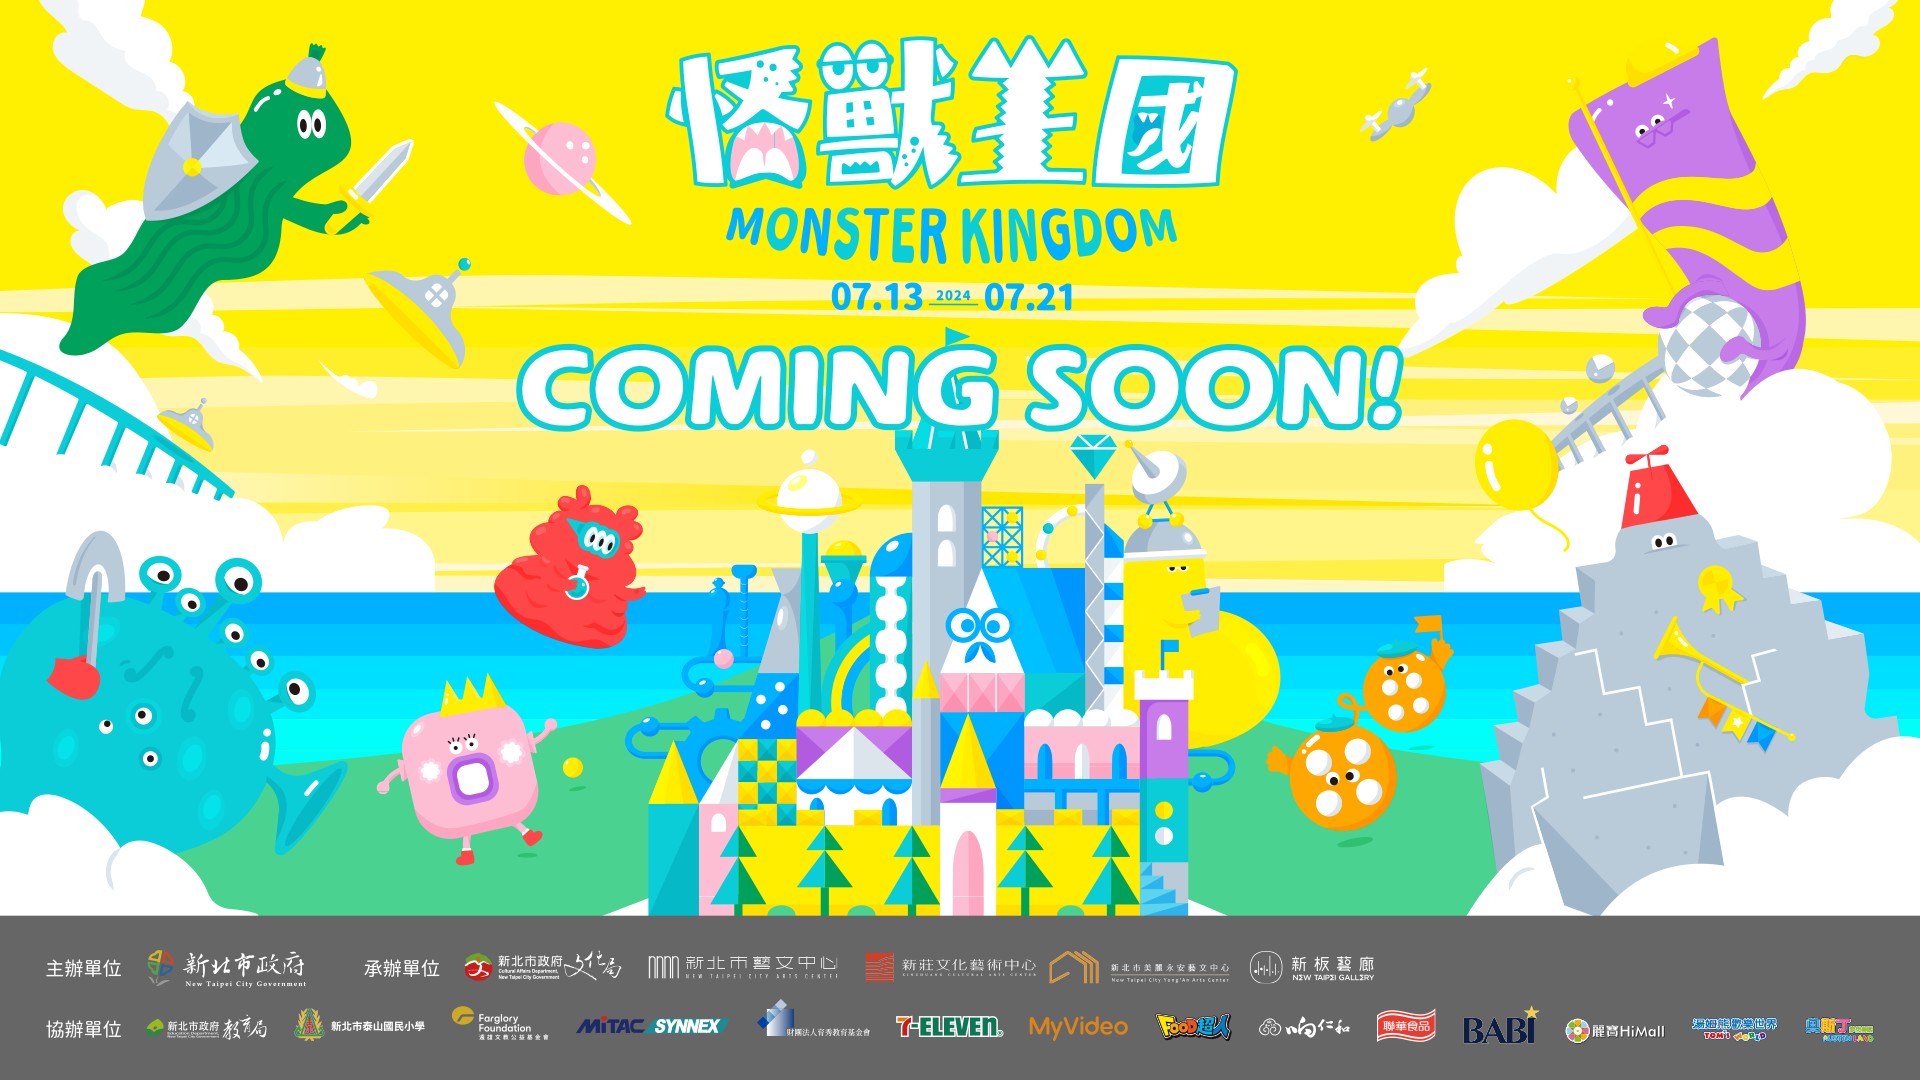 2024 New Taipei City Children's Art Festival to Debut with Monster Kingdom Theme